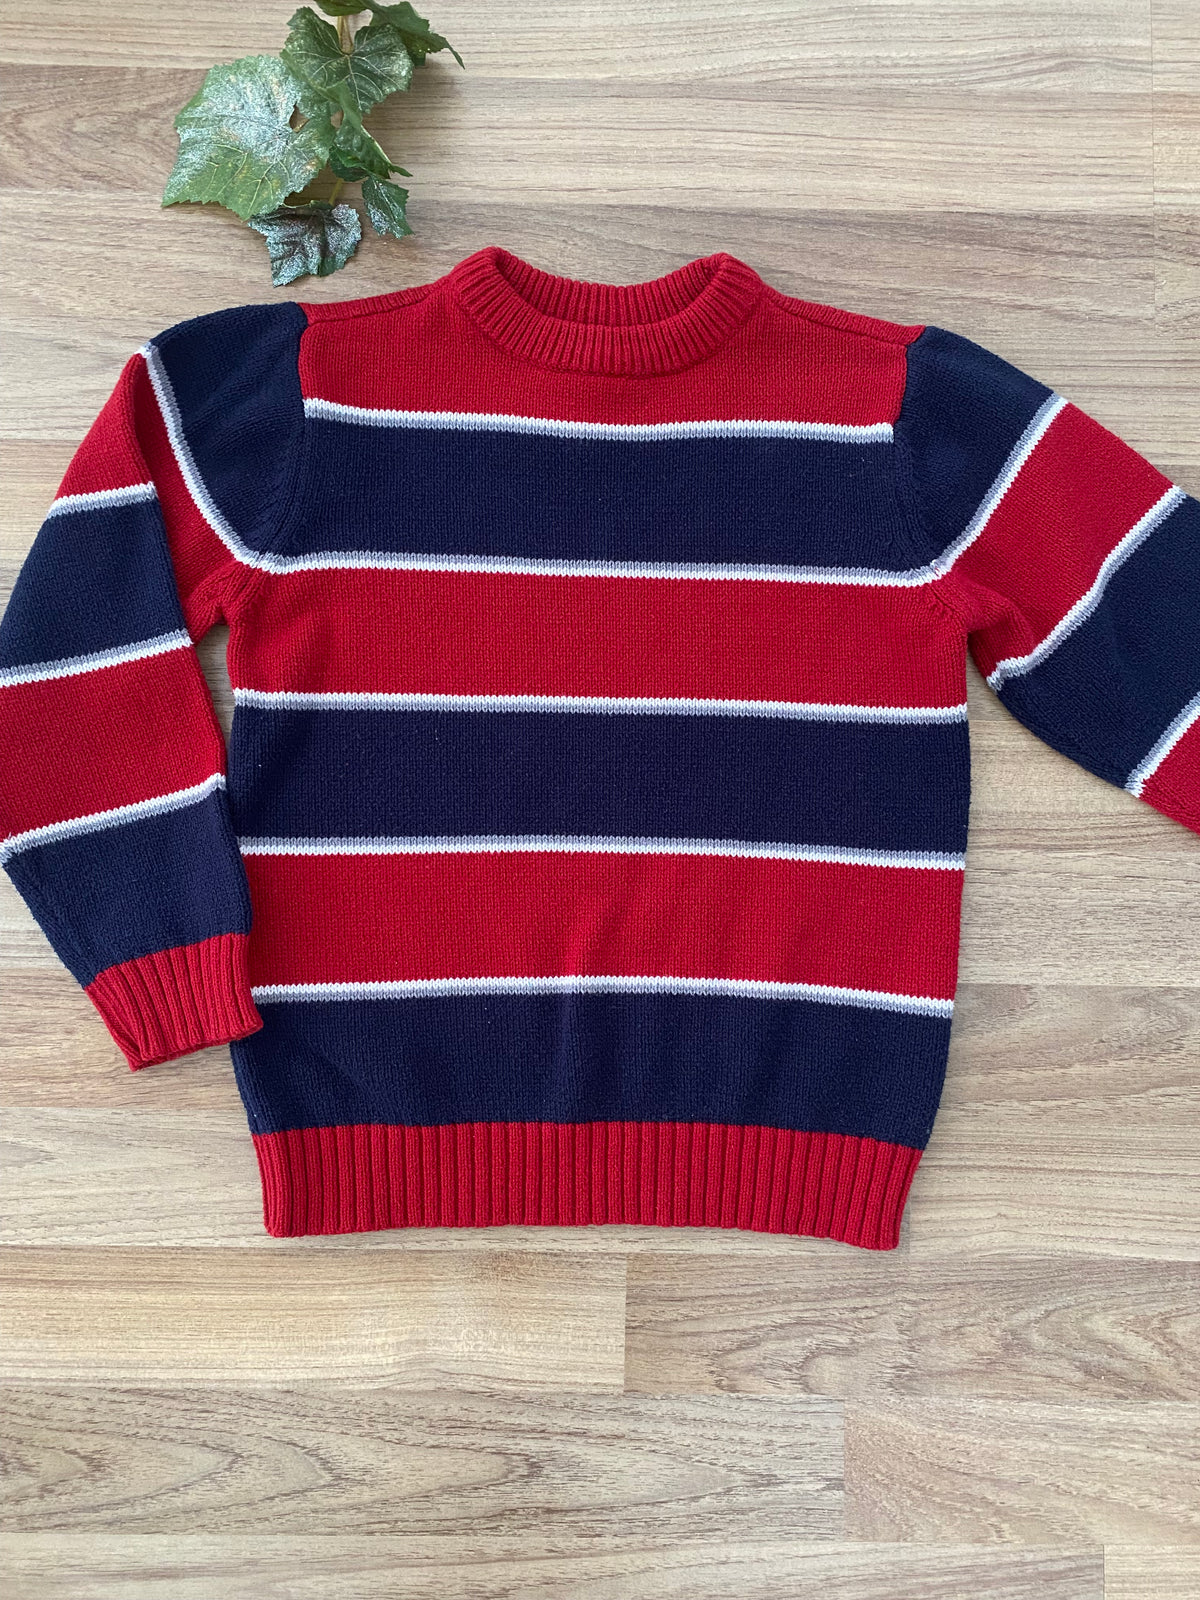 Pullover Sweater (Boys Size 5-6)